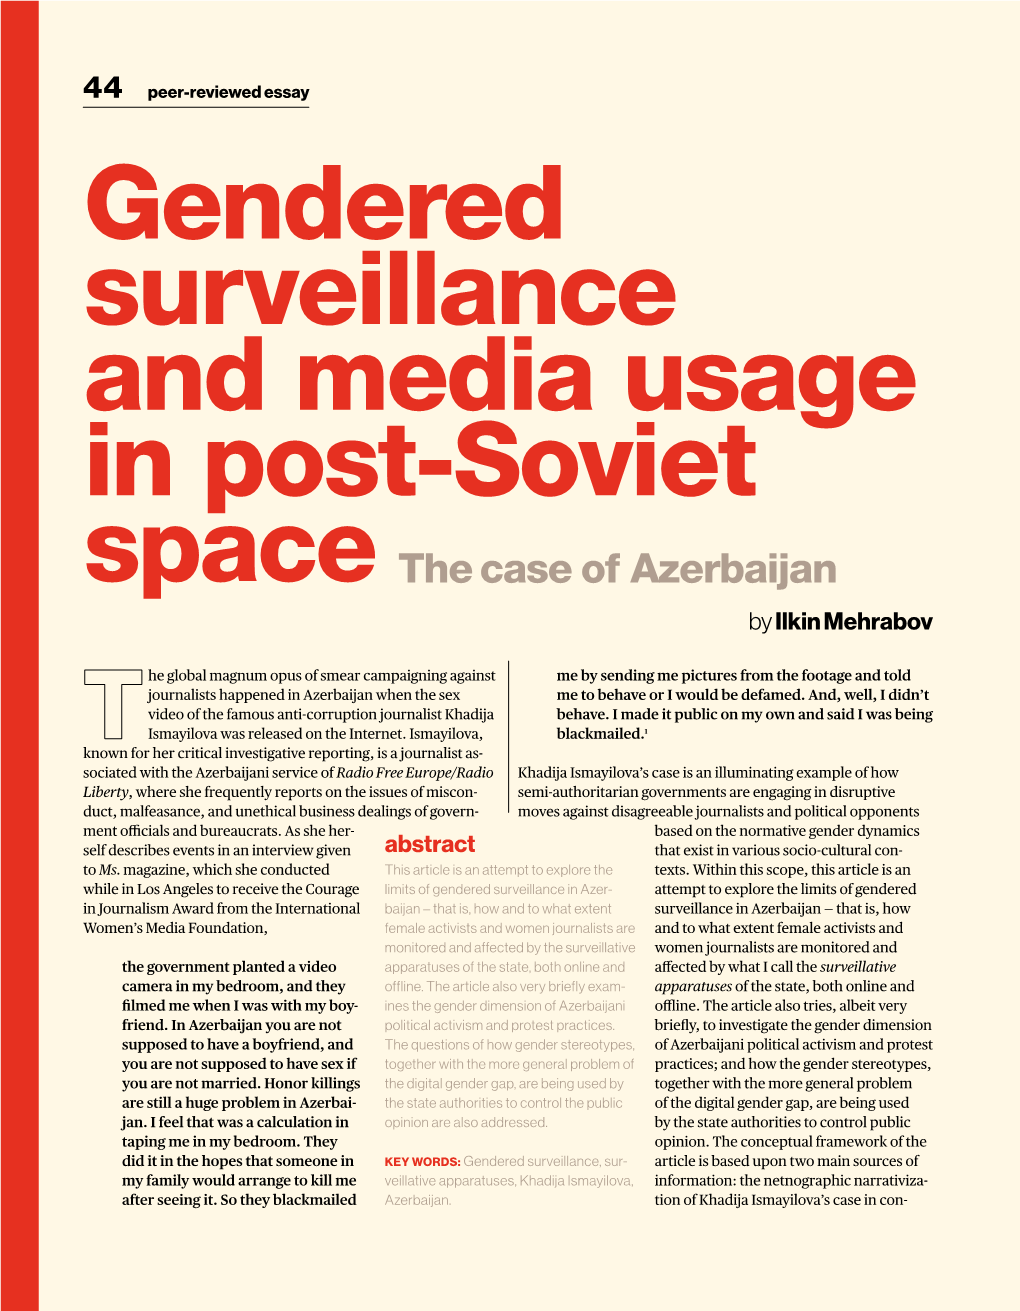 Gendered Surveillance and Media Usage in Post-Soviet Space the Case of Azerbaijan by Ilkin Mehrabov